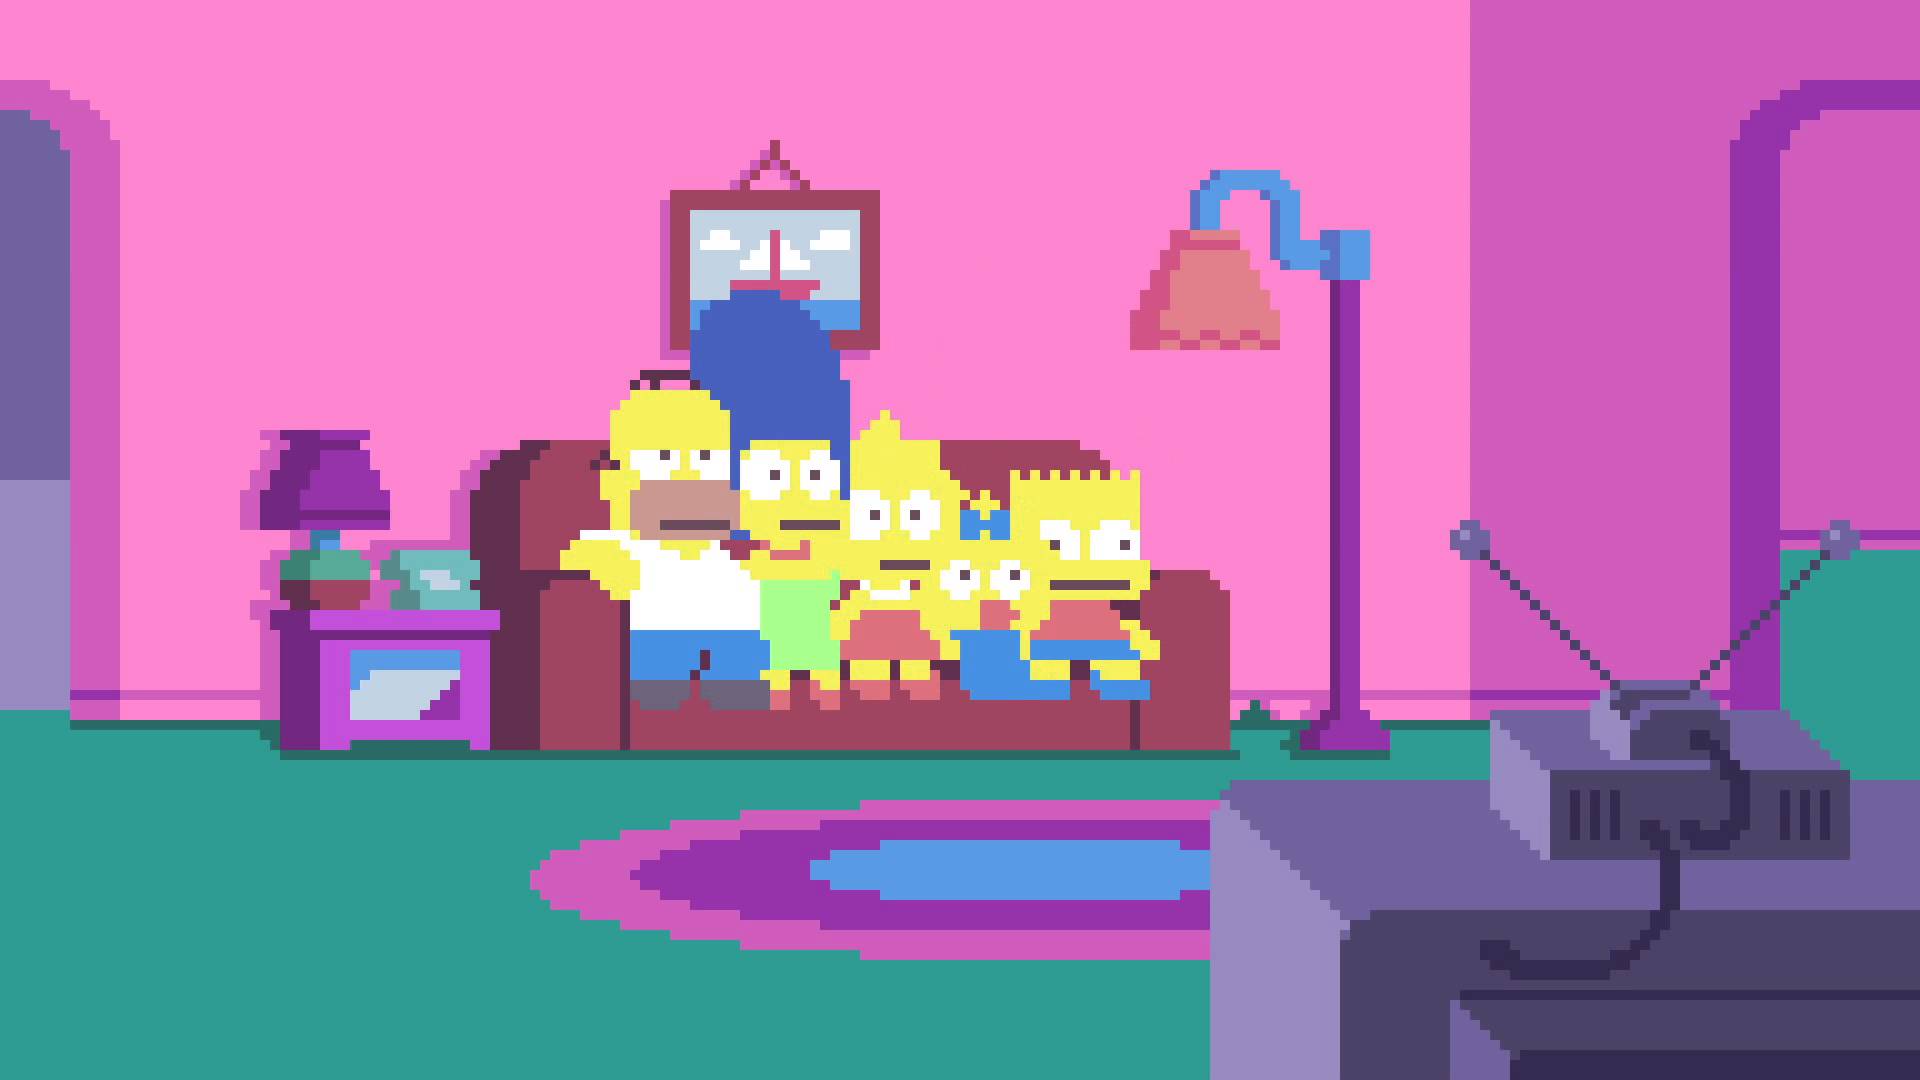 simpsons pixel version - Radio Clash Podcast Simpsons pixel version Radio Clash Music Mashup Podcast brings you the best in eclectic tunes, mashups and remixes from around the world. Since 2004, we've been bringing you the freshest and most innovative music from a diverse range of genres and cultures. Join us on our musical journey as we explore the sounds of yesterday, today, and tomorrow. Discover new music and be inspired by the mashup of musical styles that only Radio Clash can provide. Subscribe now to elevate your musical experience!